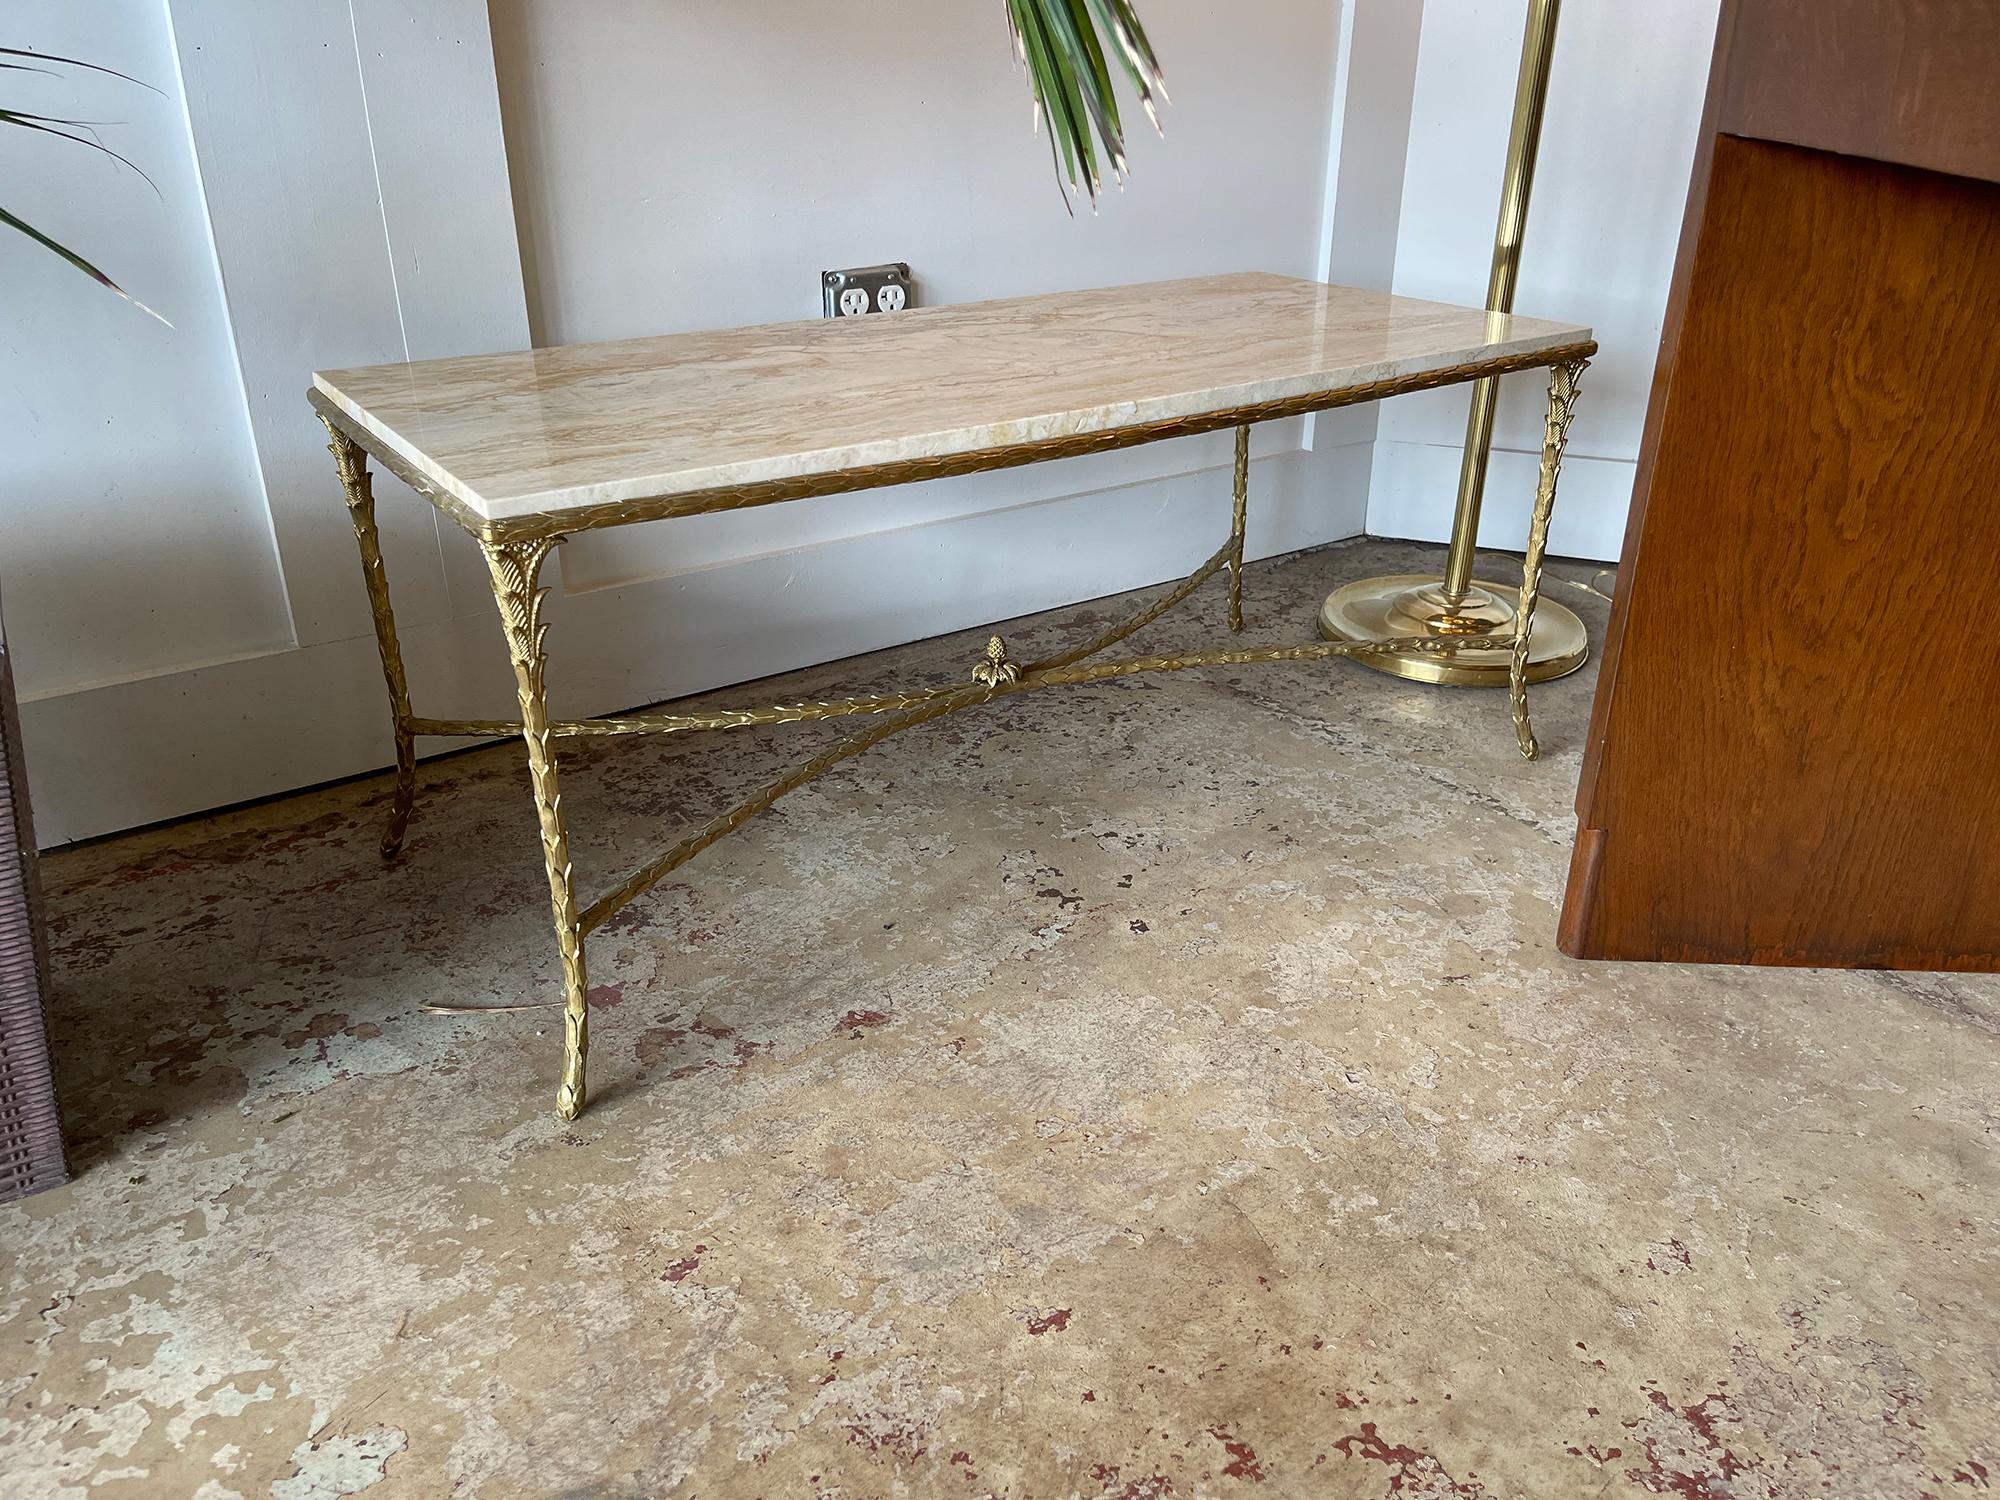 Maison Charles, circa 1960s

This very elegant Maison Charles coffee table is in its original condition; It has a gilt bronze, palm trunk motif frame and a beautiful dark brown lacquered top with a Asian decor of a bird on a branch. The feet on